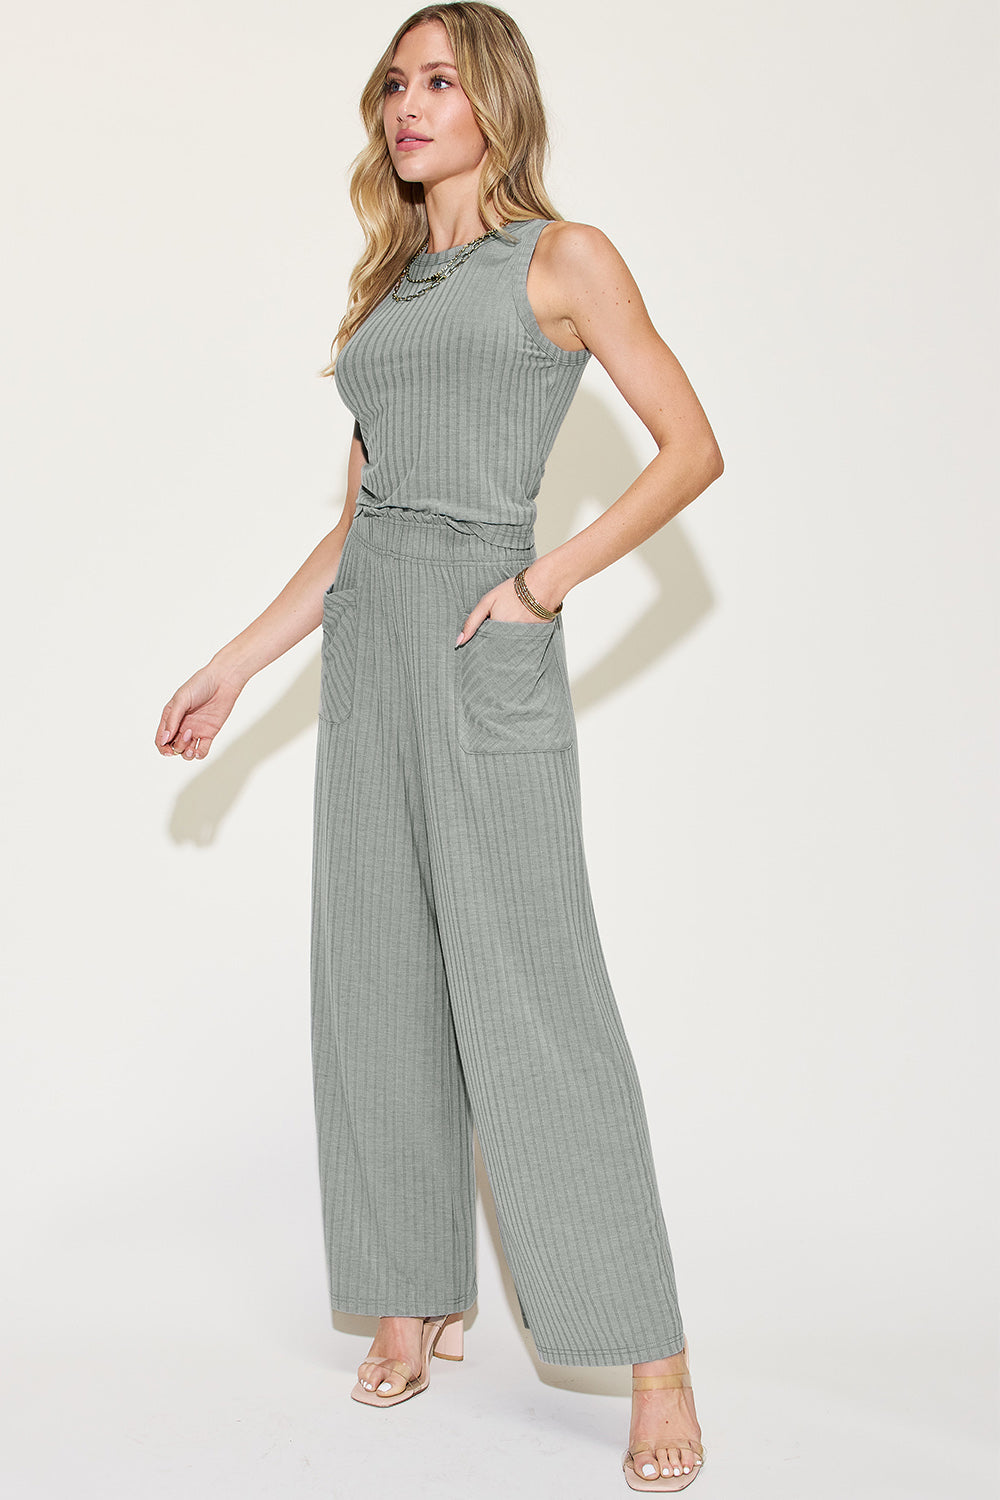 Basic Bae Full Size Ribbed Tank and Wide Leg Pants Set - The Teal Antler Boutique